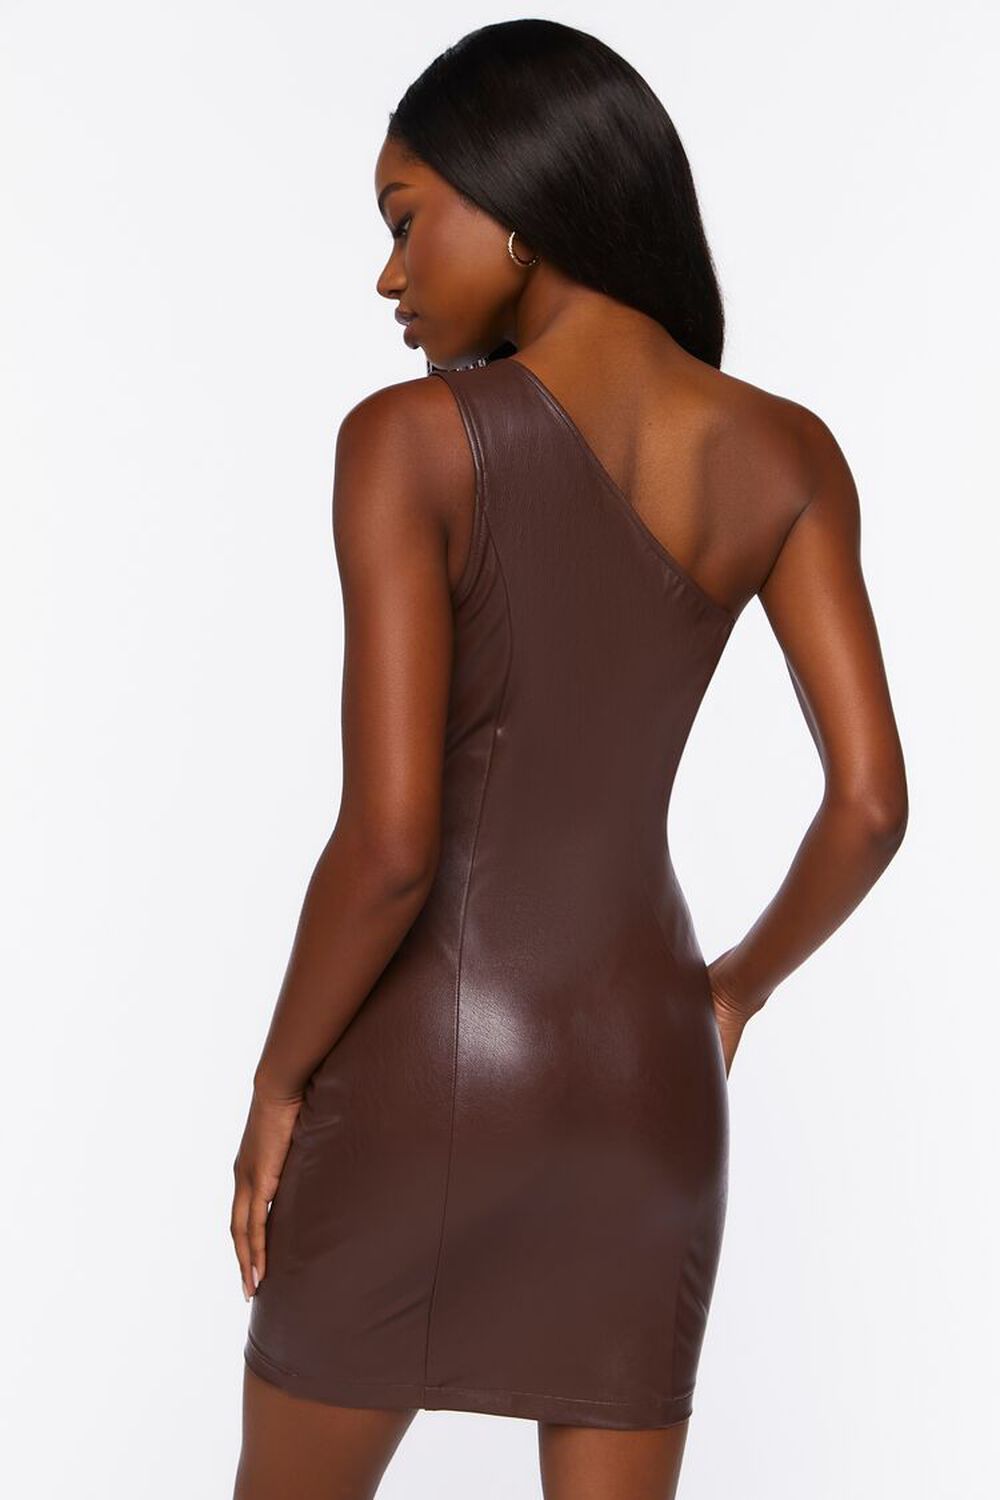 CHOCOLATE Faux Leather One-Shoulder Dress, image 3